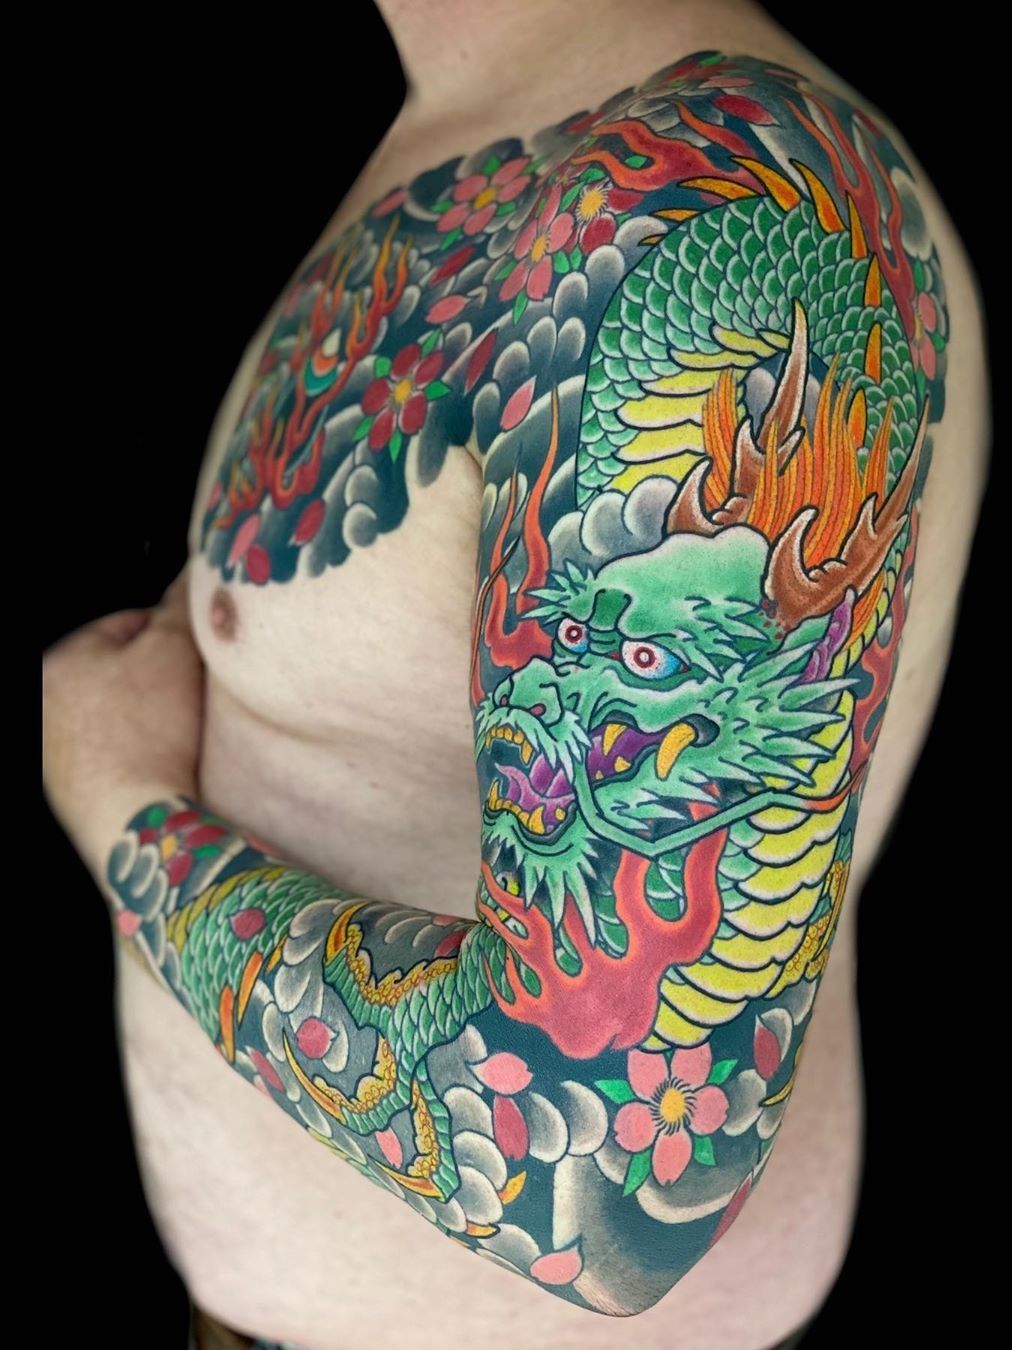 Forearm Dragon Tattoo: Perfect Blend of Style and Visibility